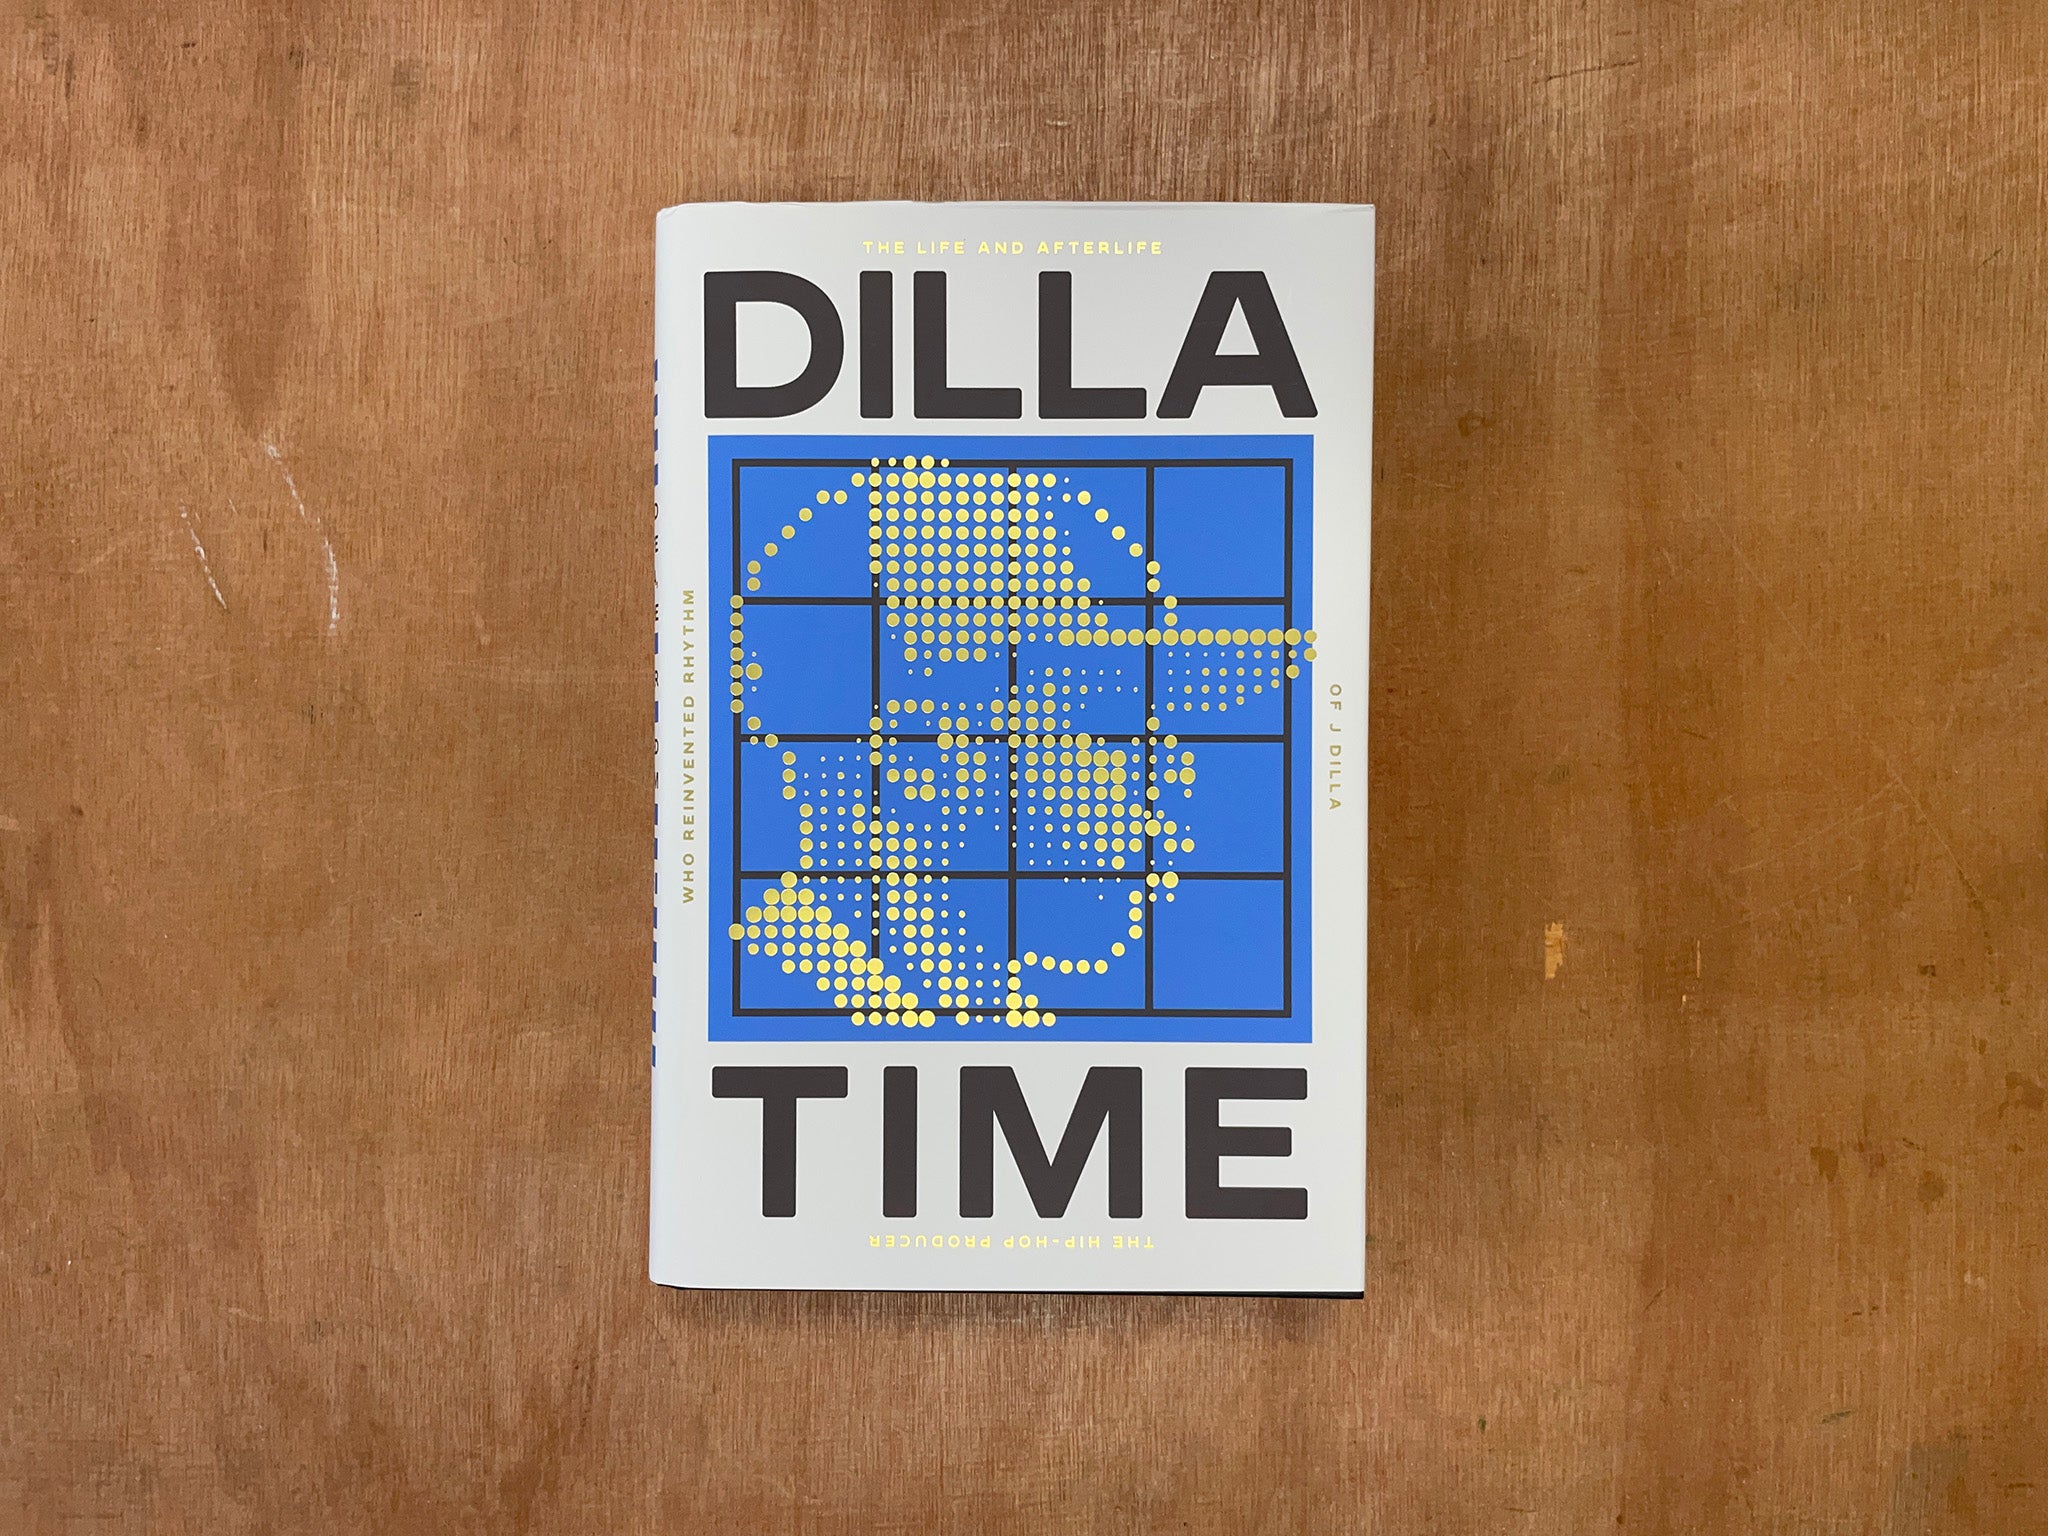 DILLA TIME... by Dan Charnas